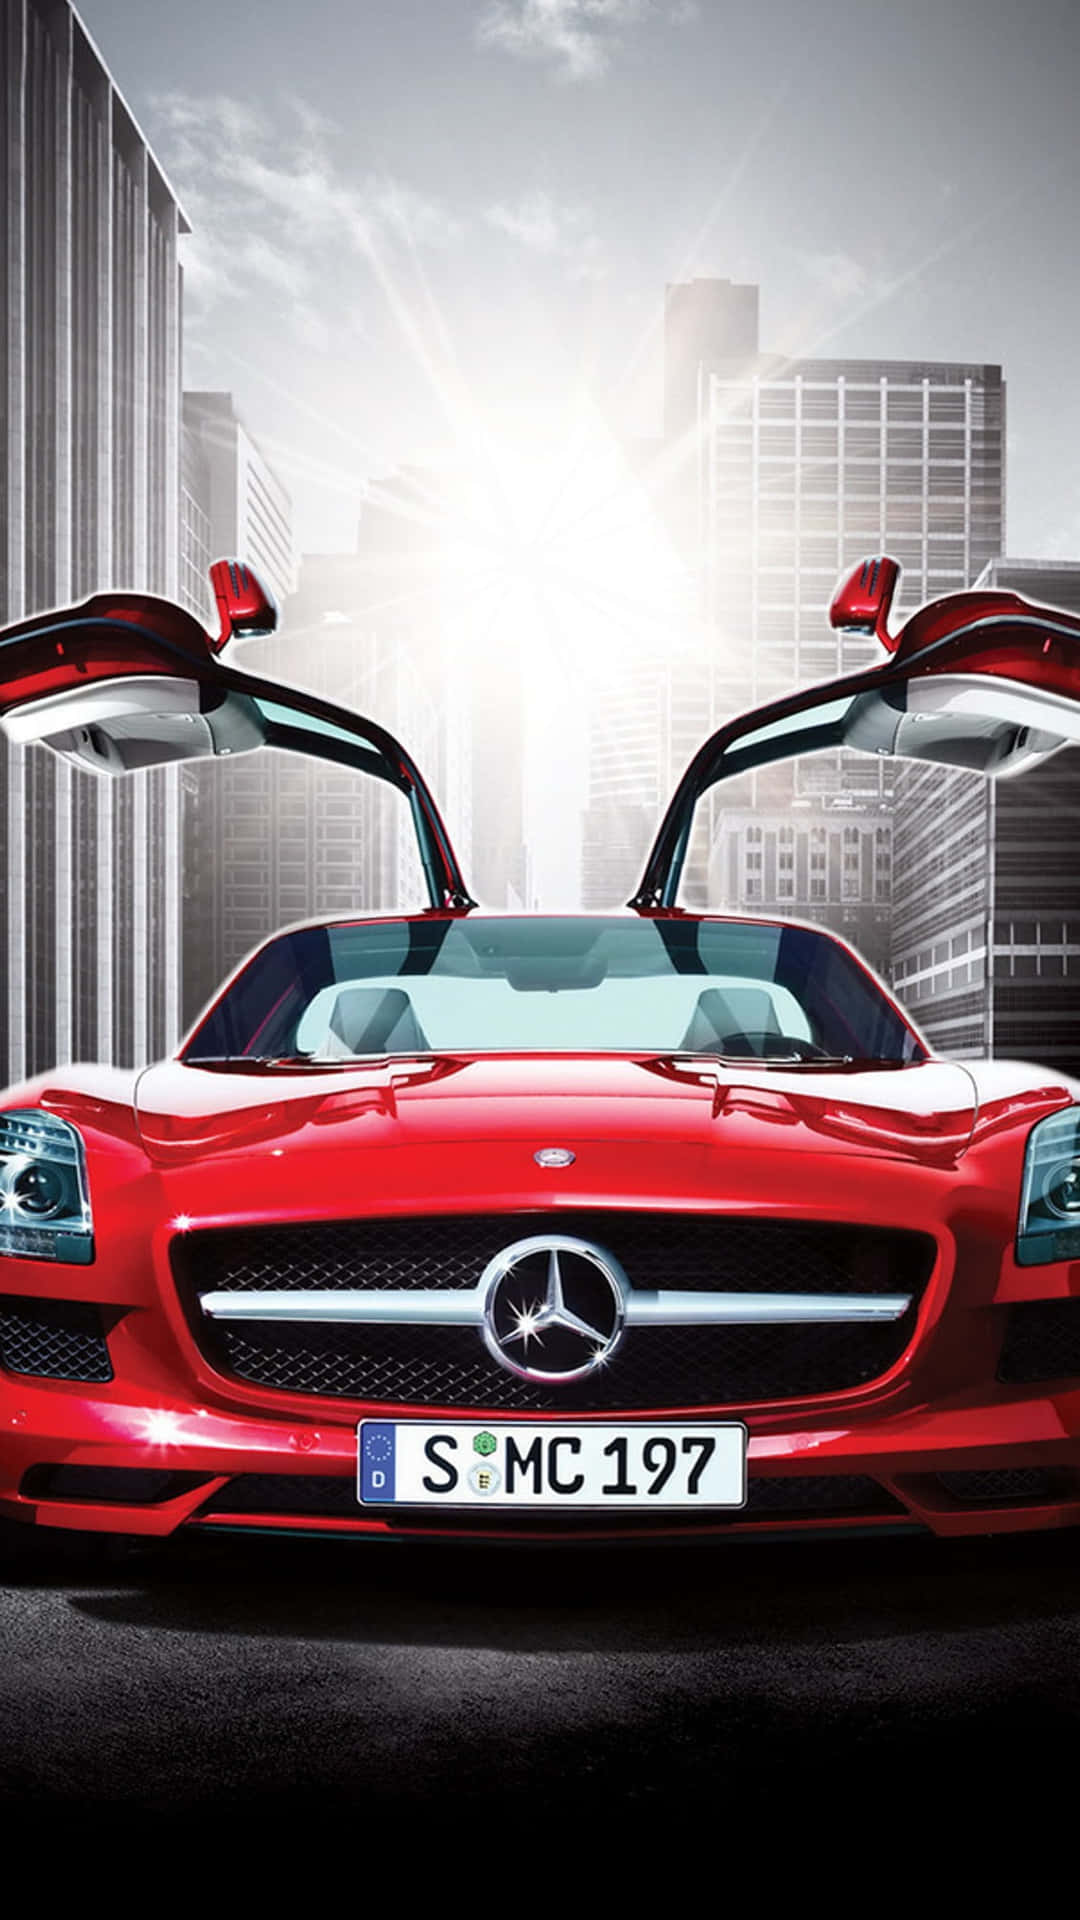 Experience state-of-the-art technology with the Mercedes Benz Phone from EMZIBI Wallpaper